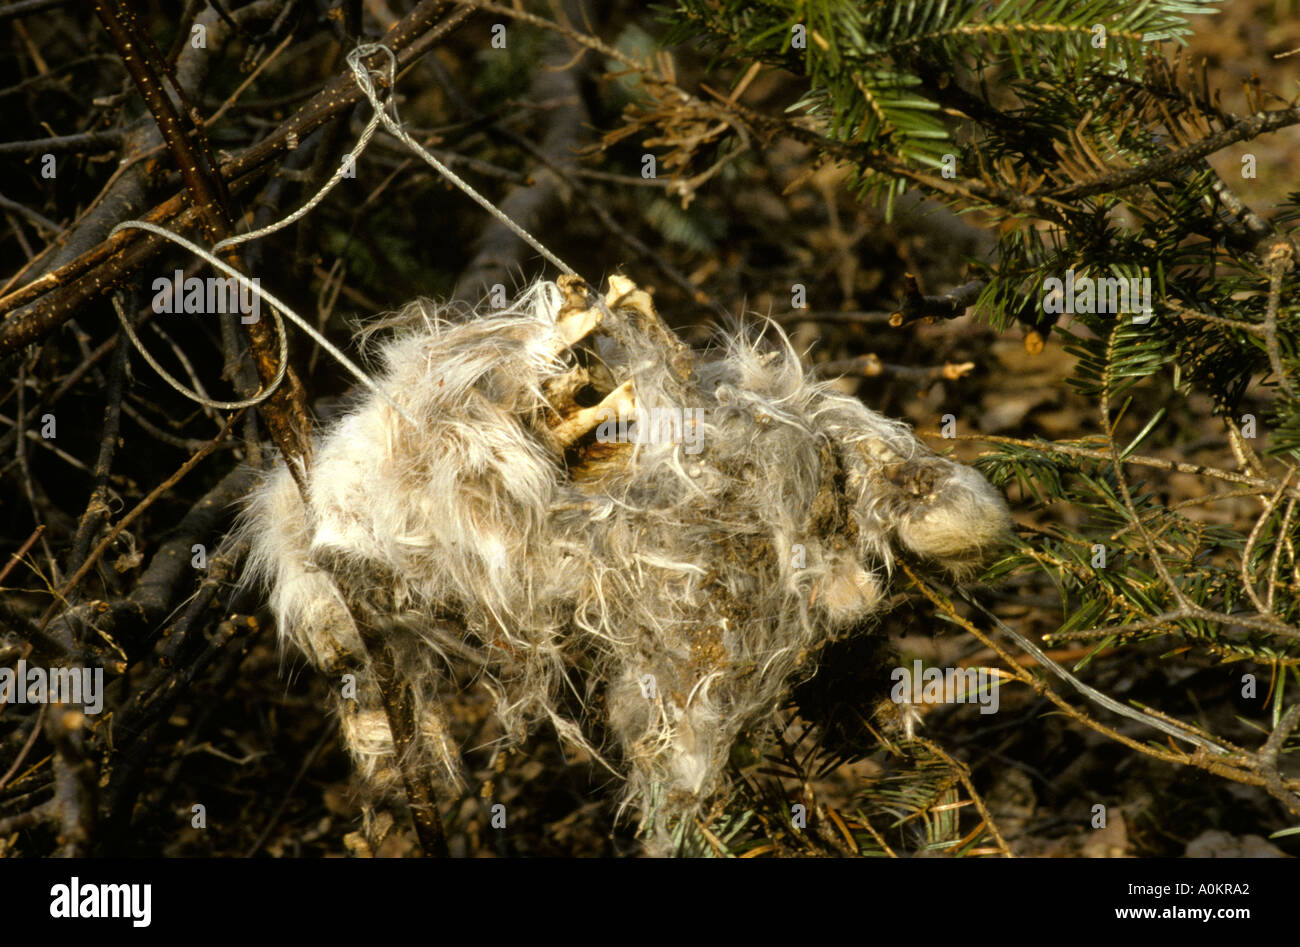 Snare trap wire snare with remains of prey that was left to die in an unattended trap New Brunswick Canada Stock Photo